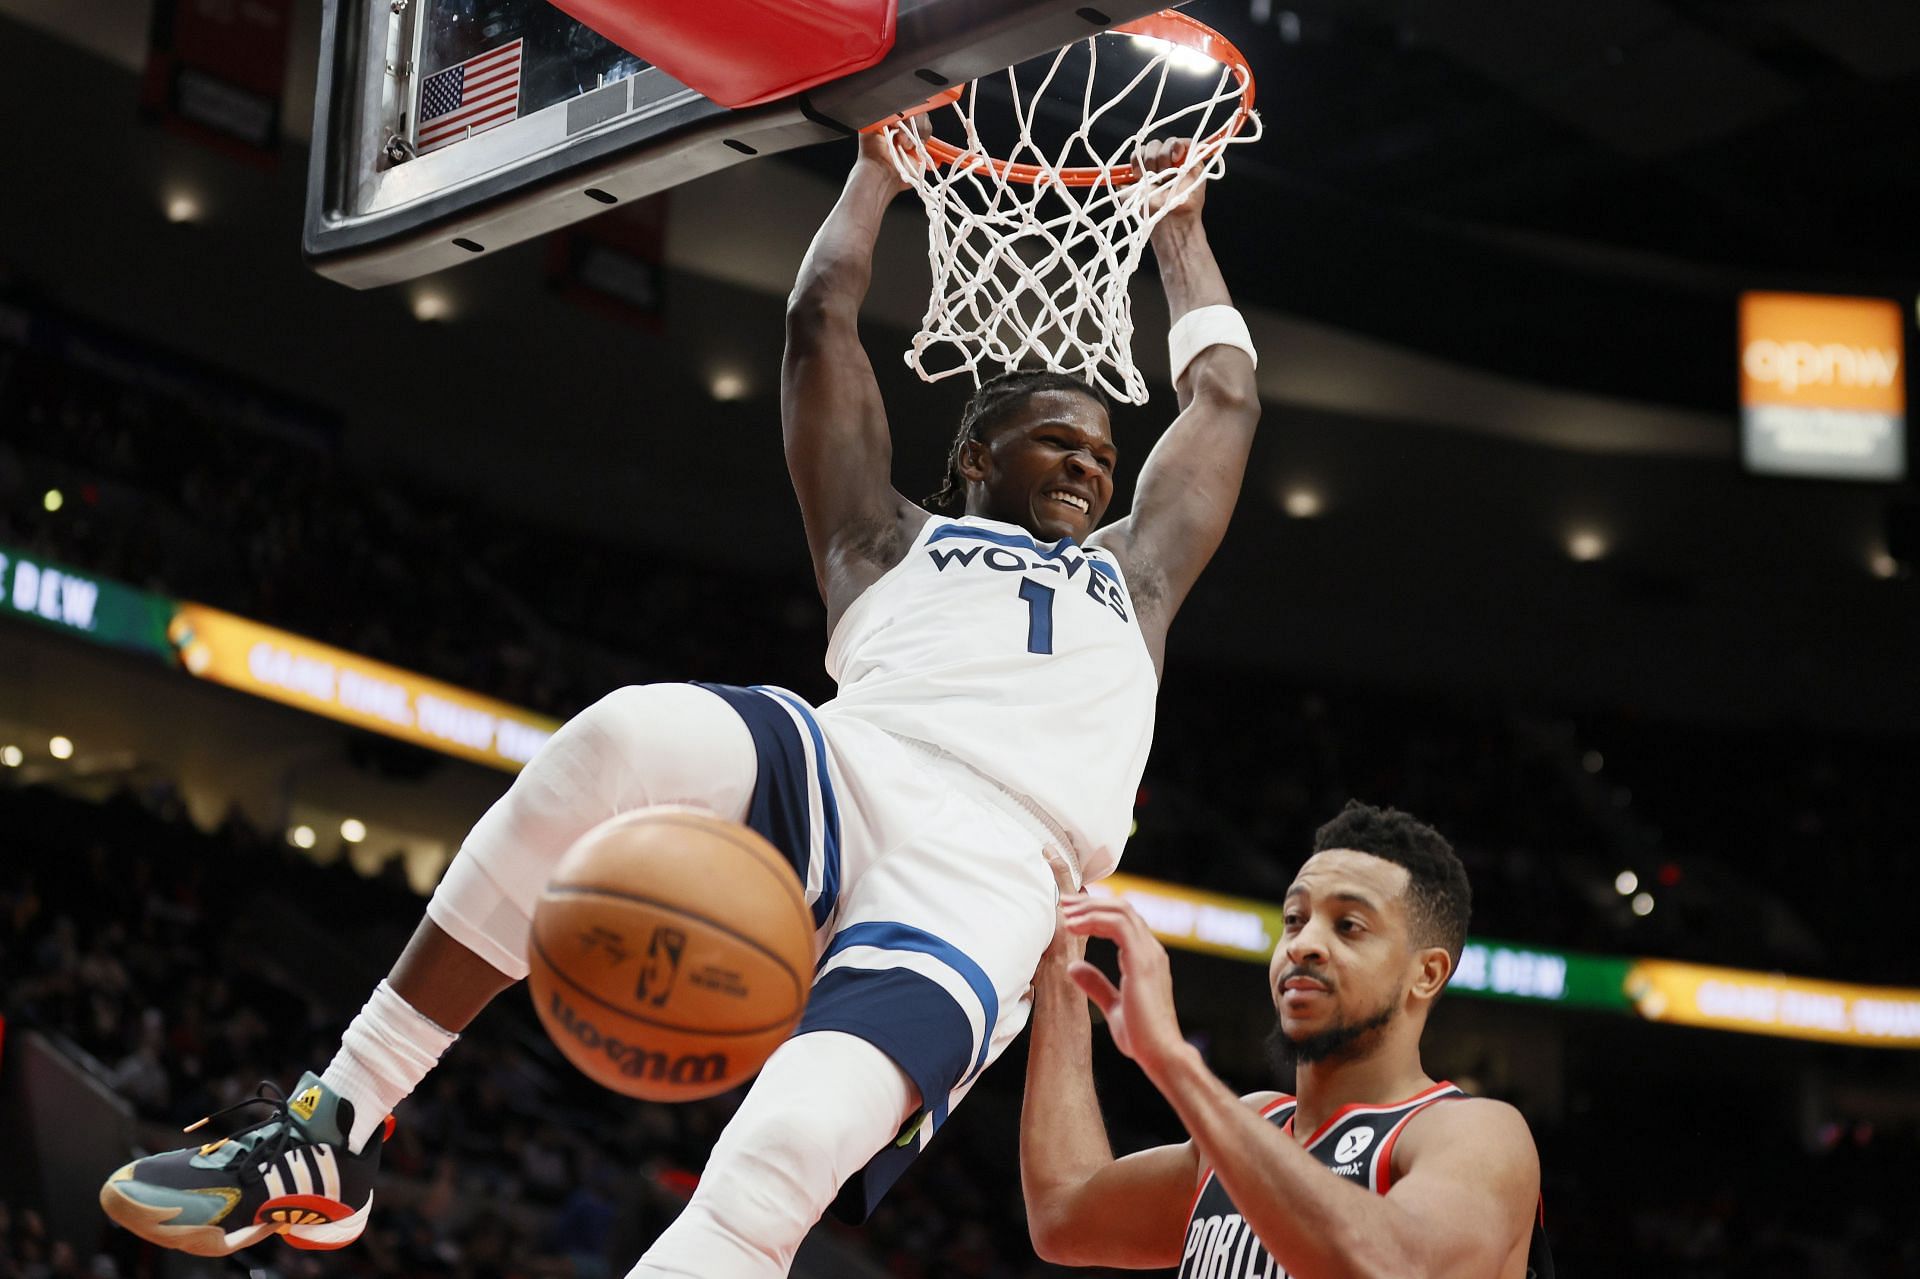 Minnesota Timberwolves vs. Portland Trail Blazers; Anthony Edwards slams it down late in his 40-point perforamce.